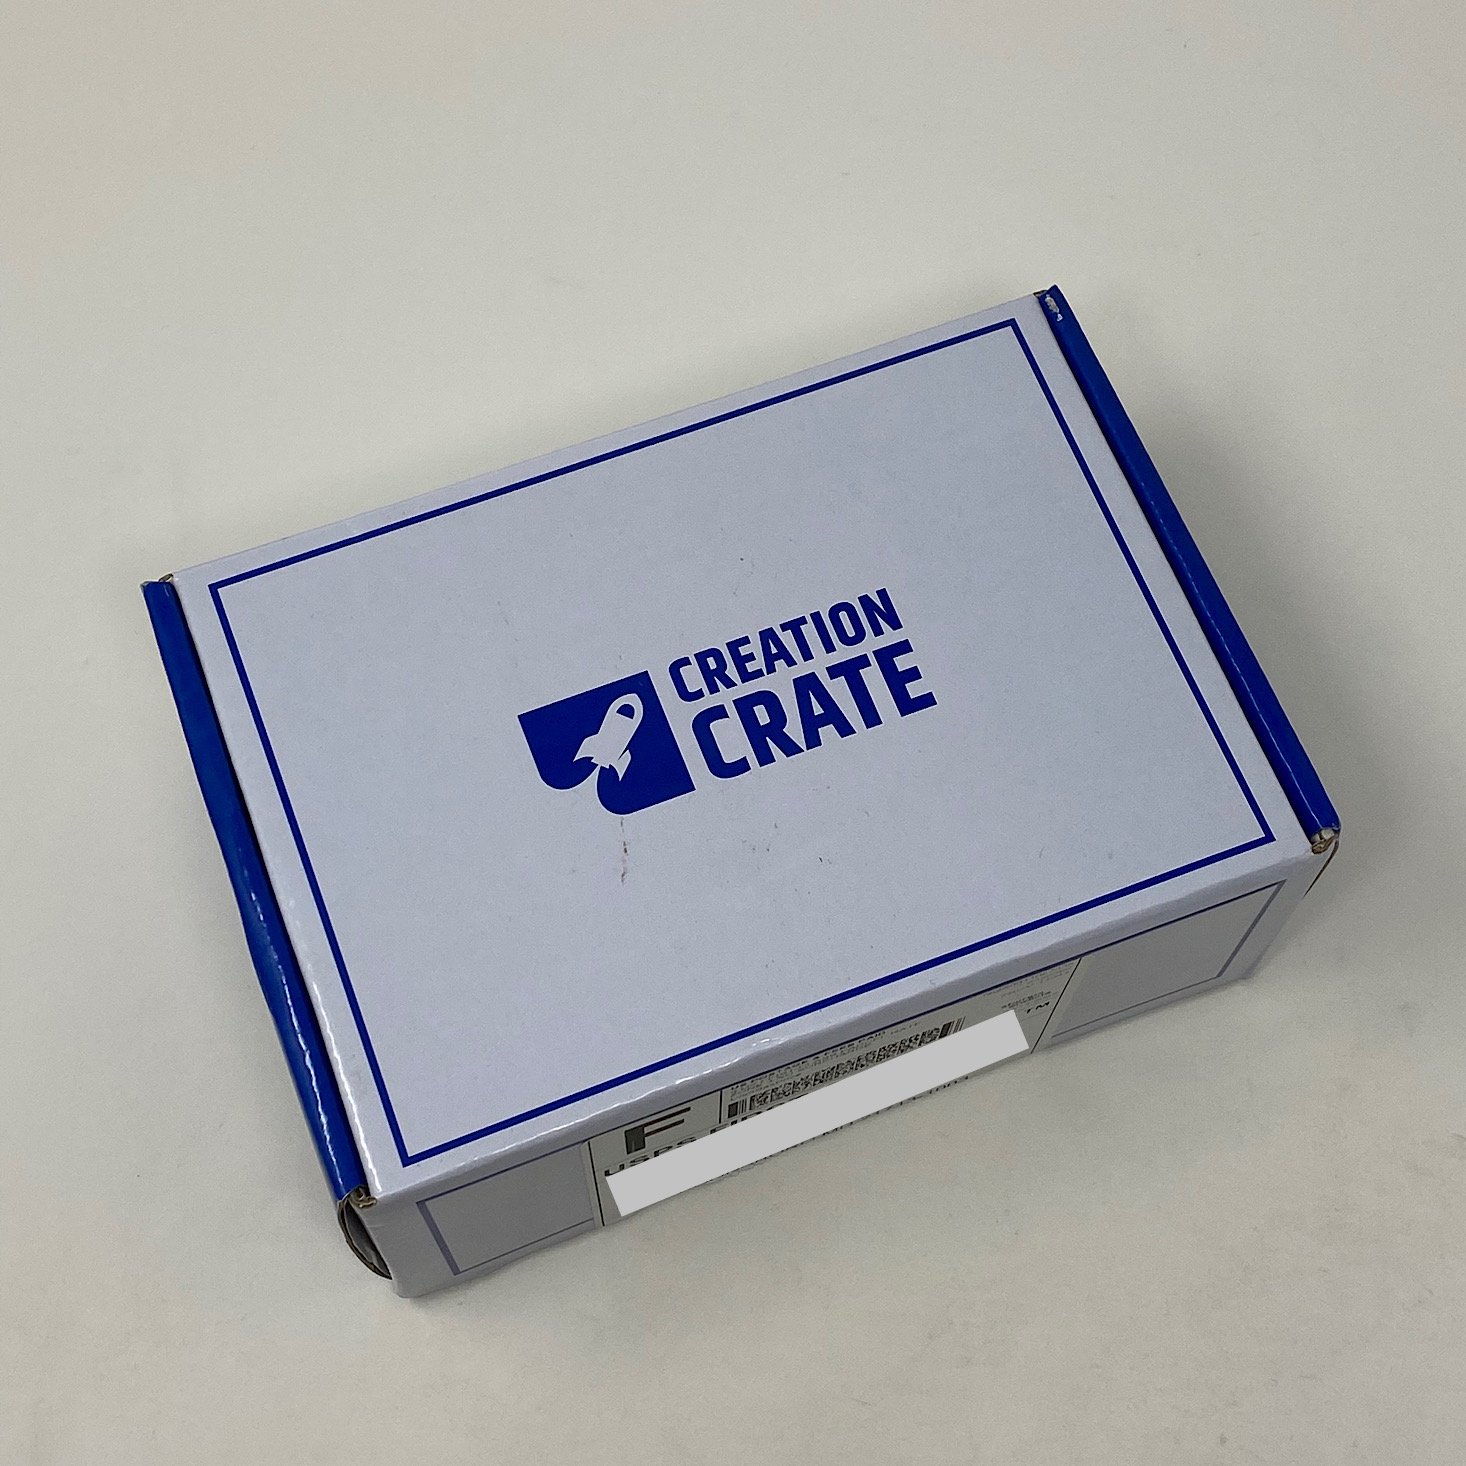 Creation Crate Review + Coupon – Project 9: Lock Box